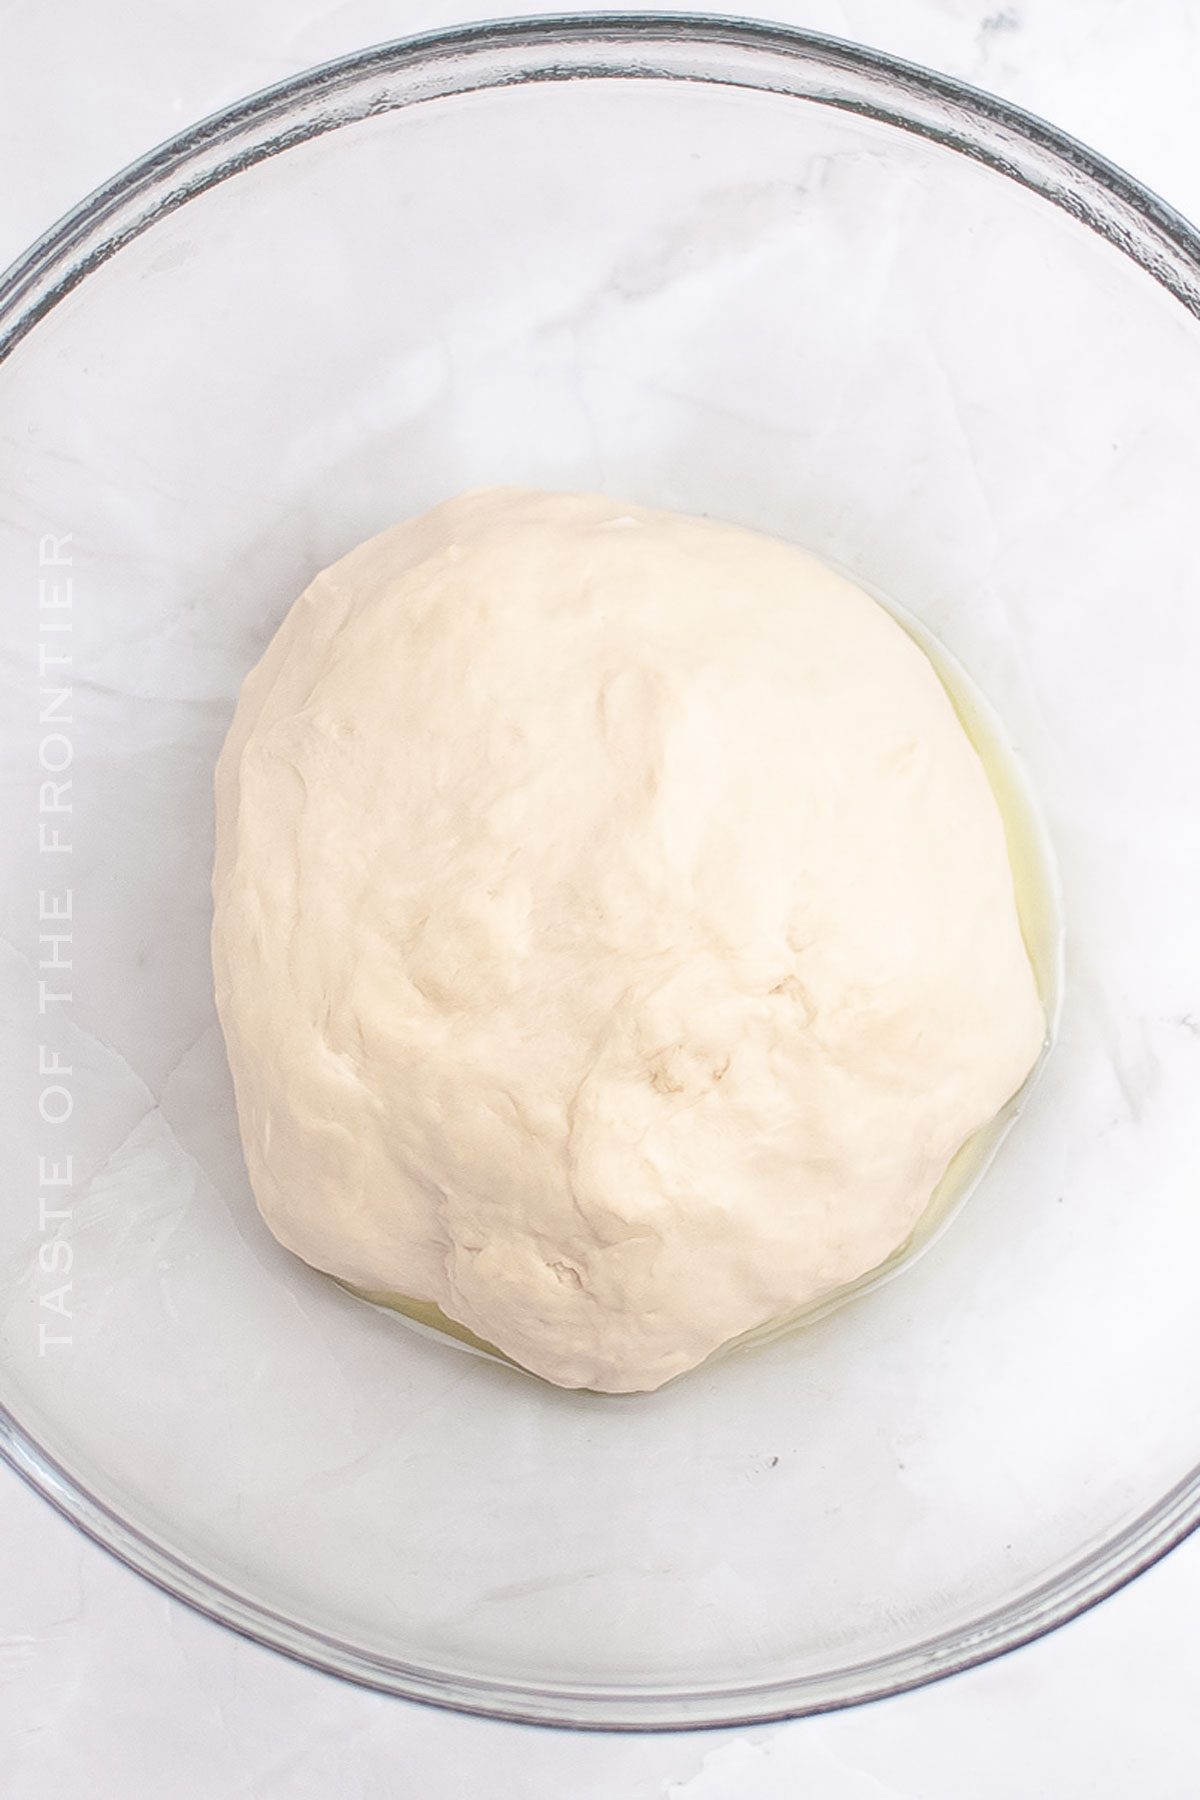 dough made with starter